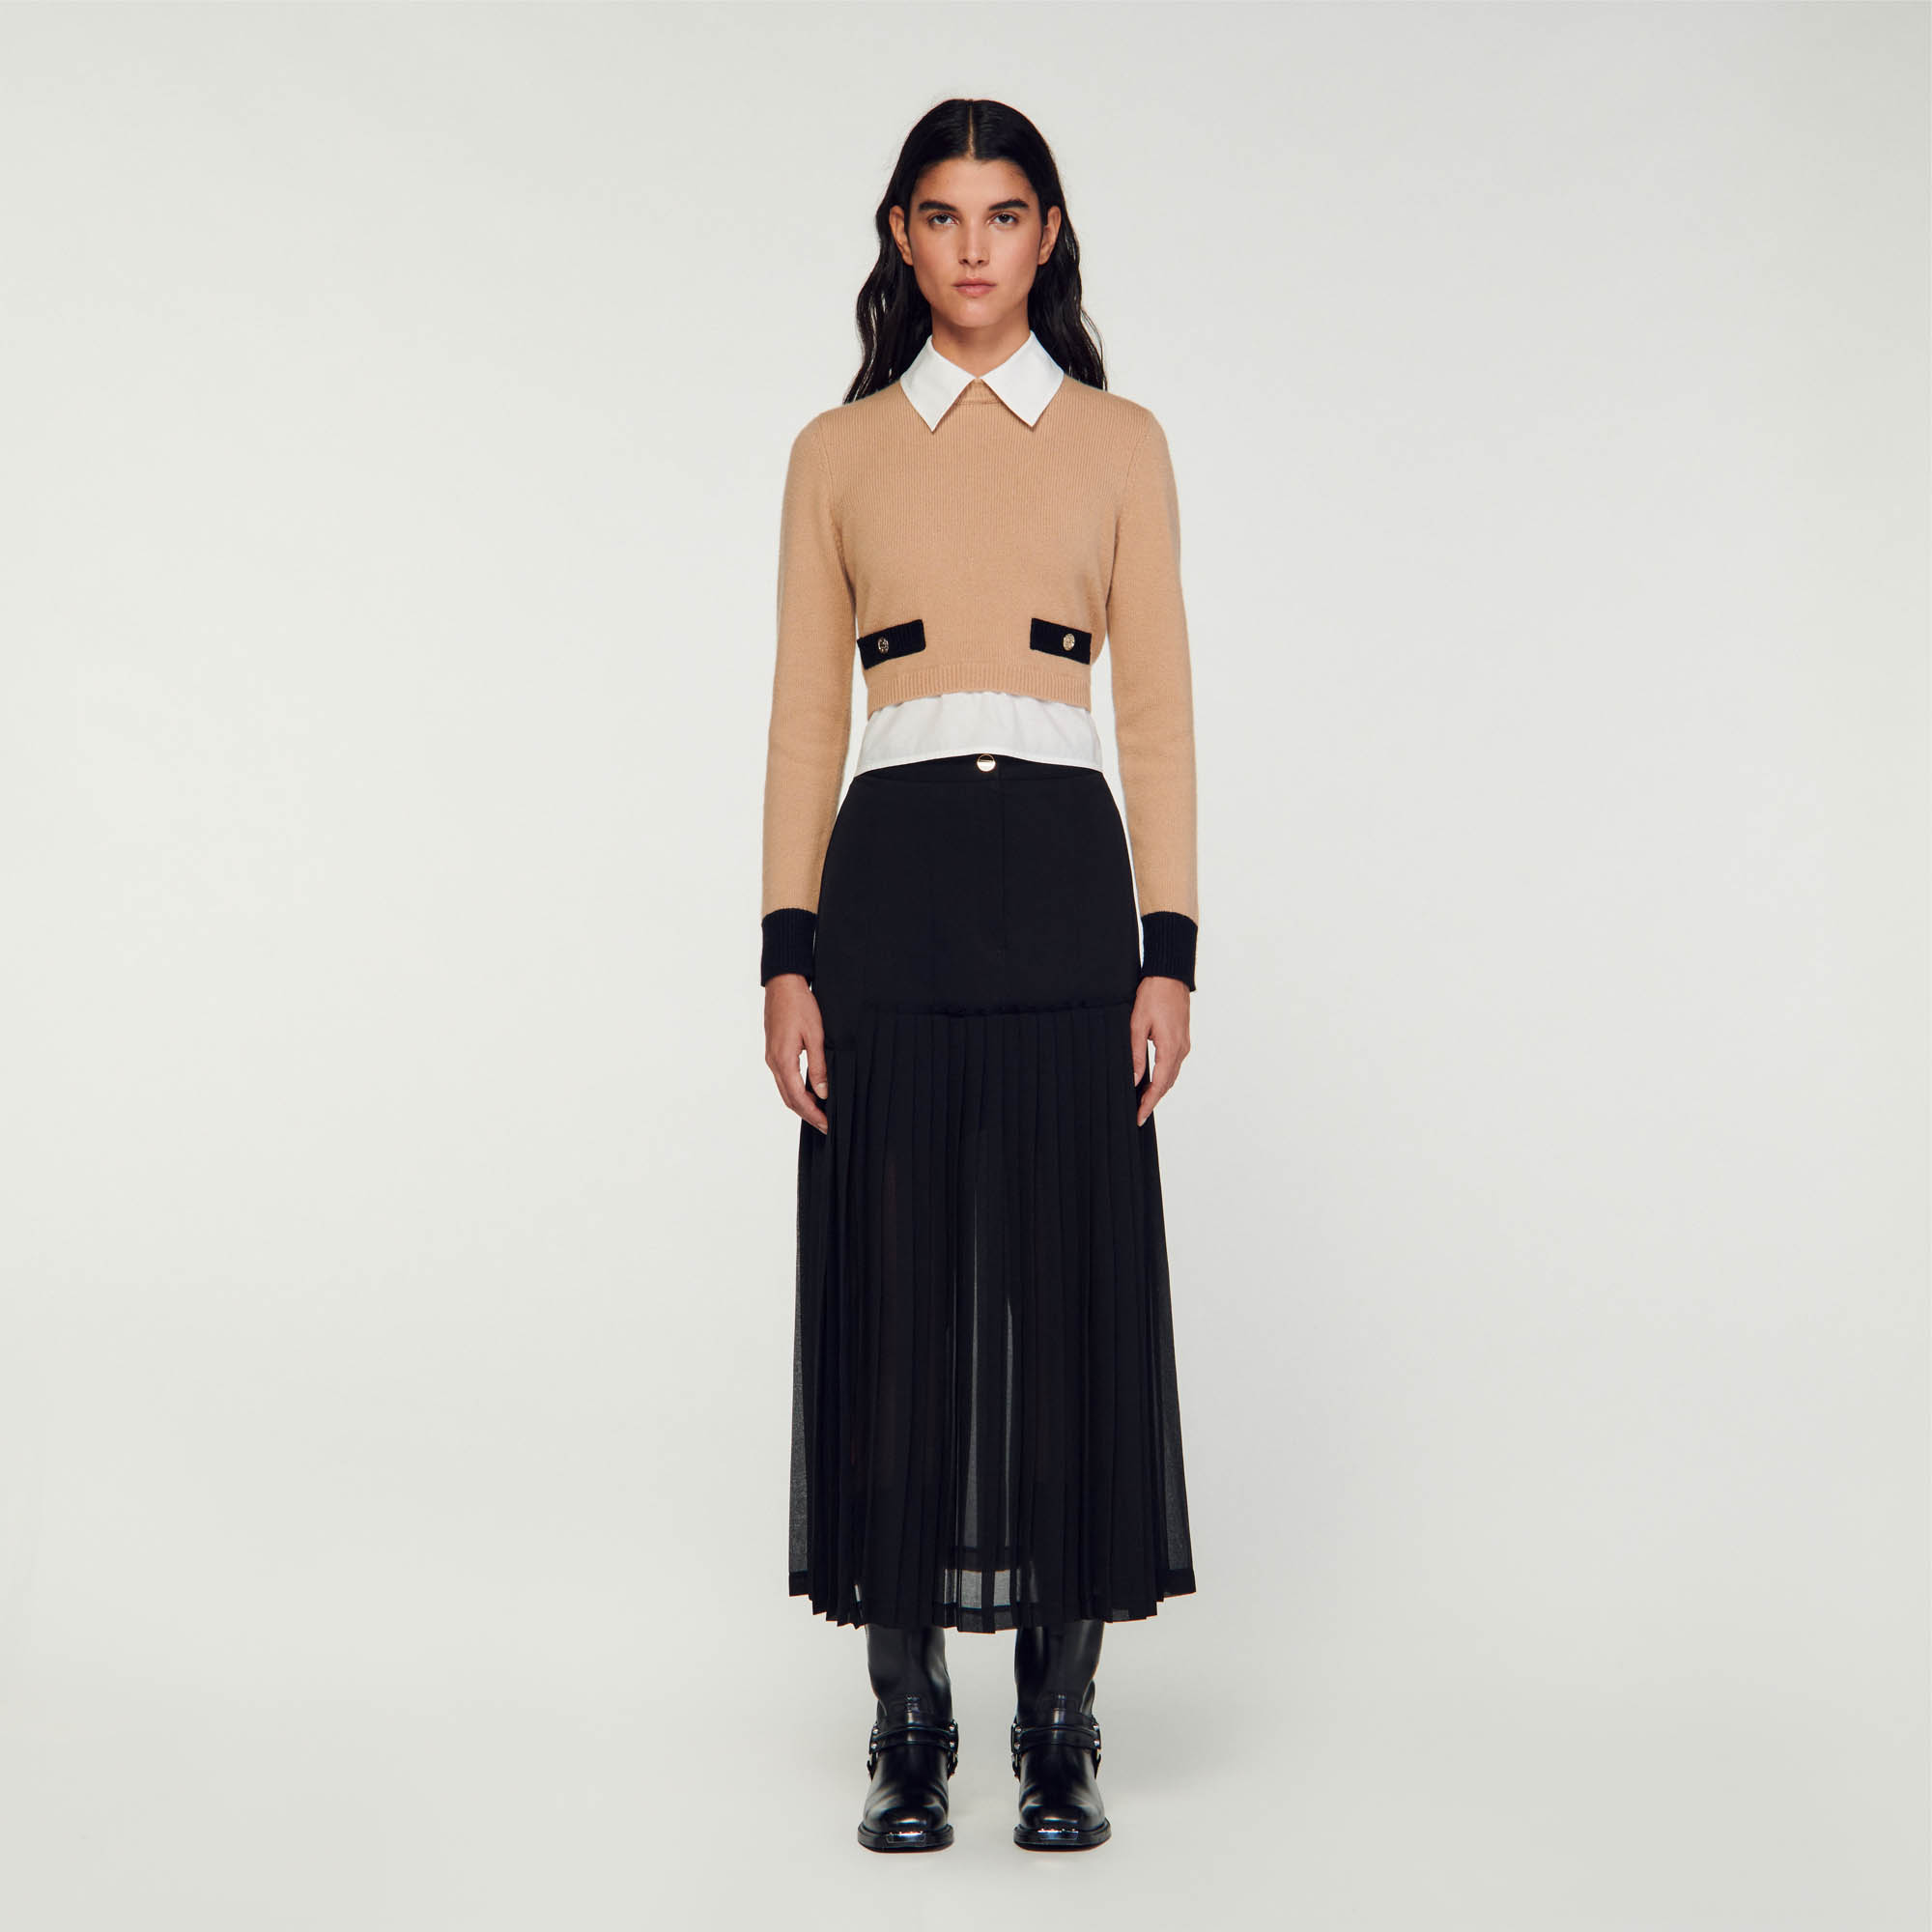 Sandro polyester Lining: A long skirt with a close-fitting top and pleated bottom, buttoned at the front and with slits at the front and back